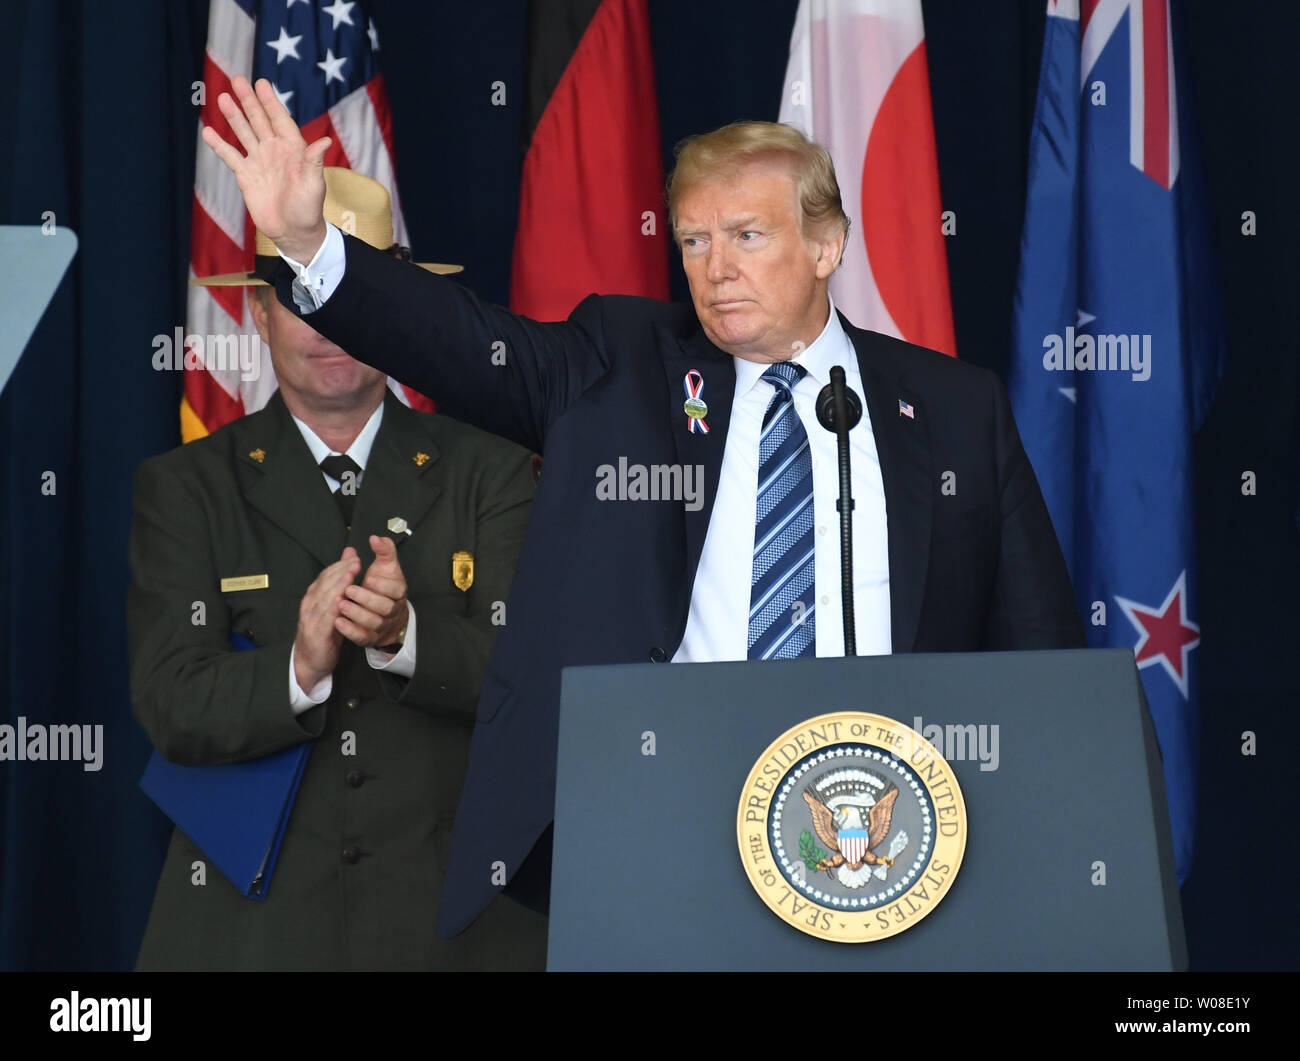 President Donald Trump waves at a ceremony marking the anniversary of 9/11 at the Flight 93 National Memorial in Shanksville, Pennsylvania on Tuesday, September 11, 2018. Flight 93 crashed during the September 11, 2001 terrorist attacks.         Photo by Pat Benic/UPI Stock Photo